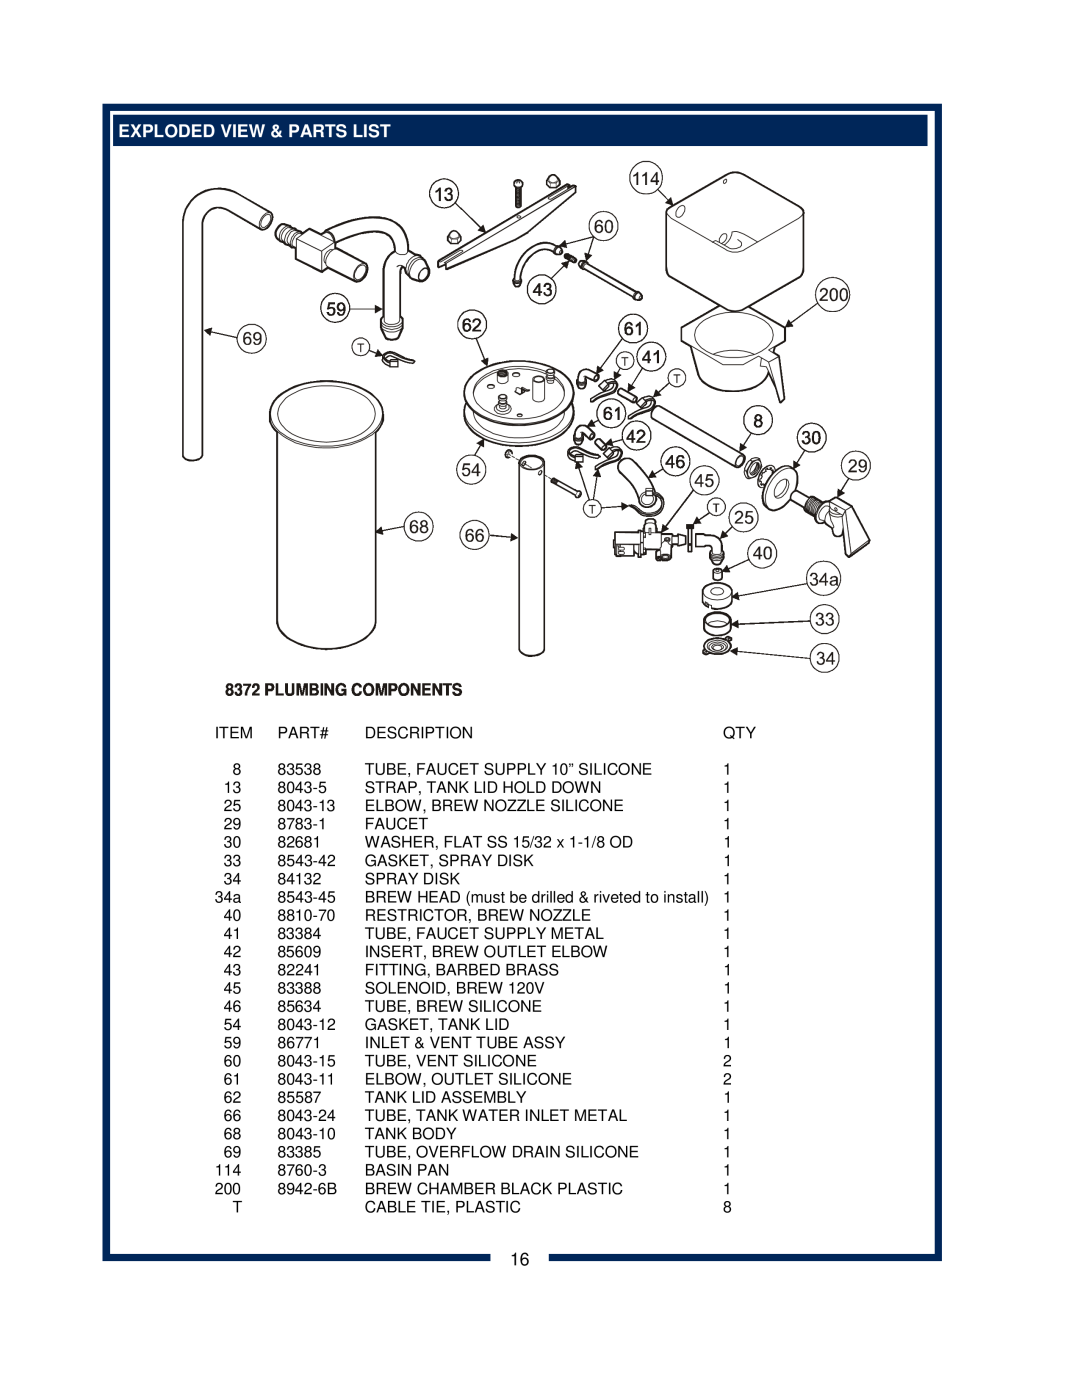 Bloomfield 8372 owner manual Exploded View & Parts List, Plumbing Components 